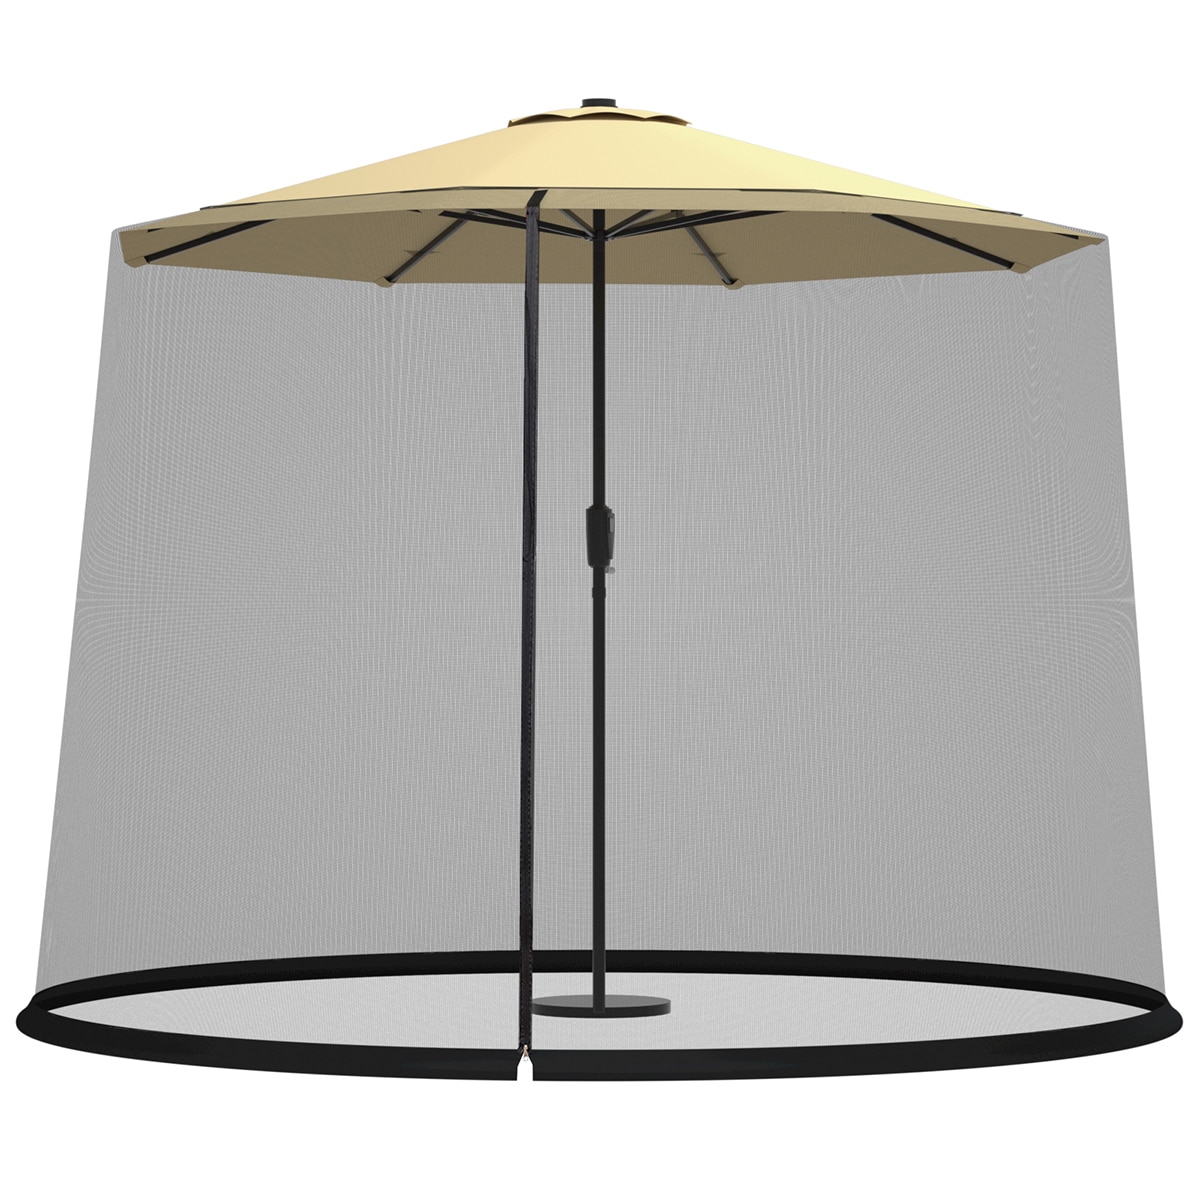 Mosquito net Patio Furniture at